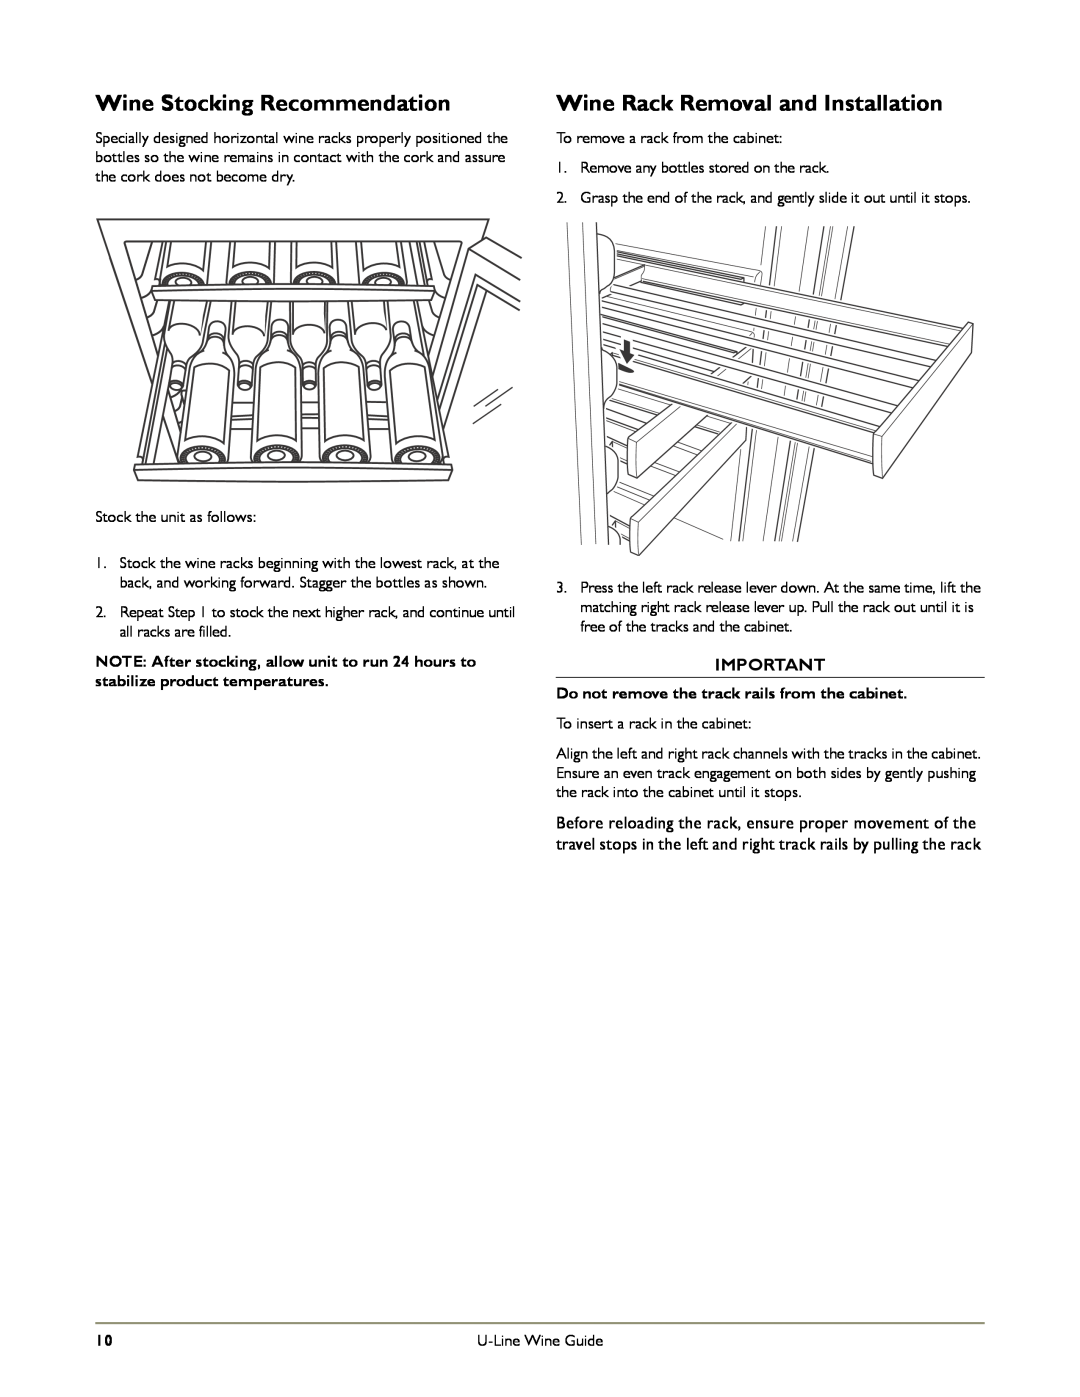 U-Line 1175WC manual Wine Stocking Recommendation, Wine Rack Removal and Installation 